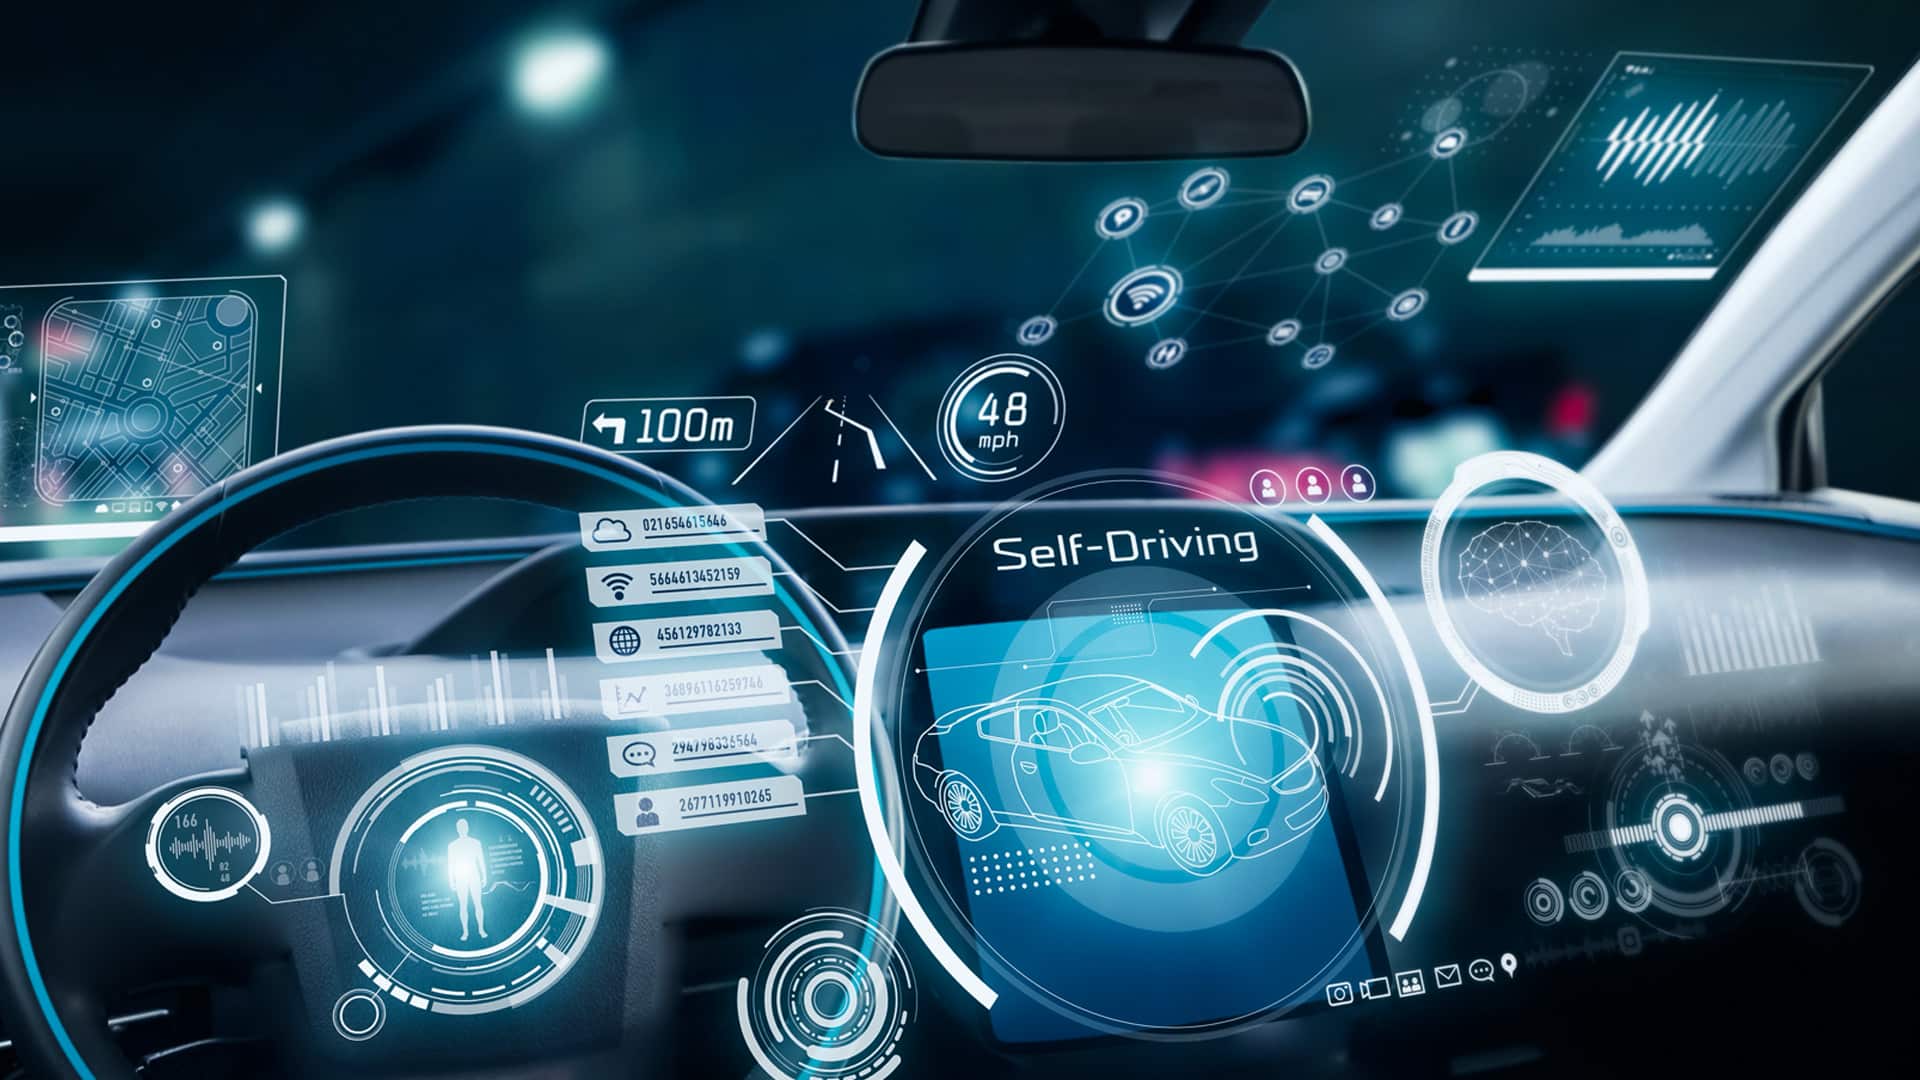 Interior view of a self-driving car with a detailed ADAS interface on the windshield. The dashboard displays speed, navigation, and vehicle status, while the windshield projects interactive graphics for autonomous driving functions, such as adaptive cruise control and lane-keeping assistance.